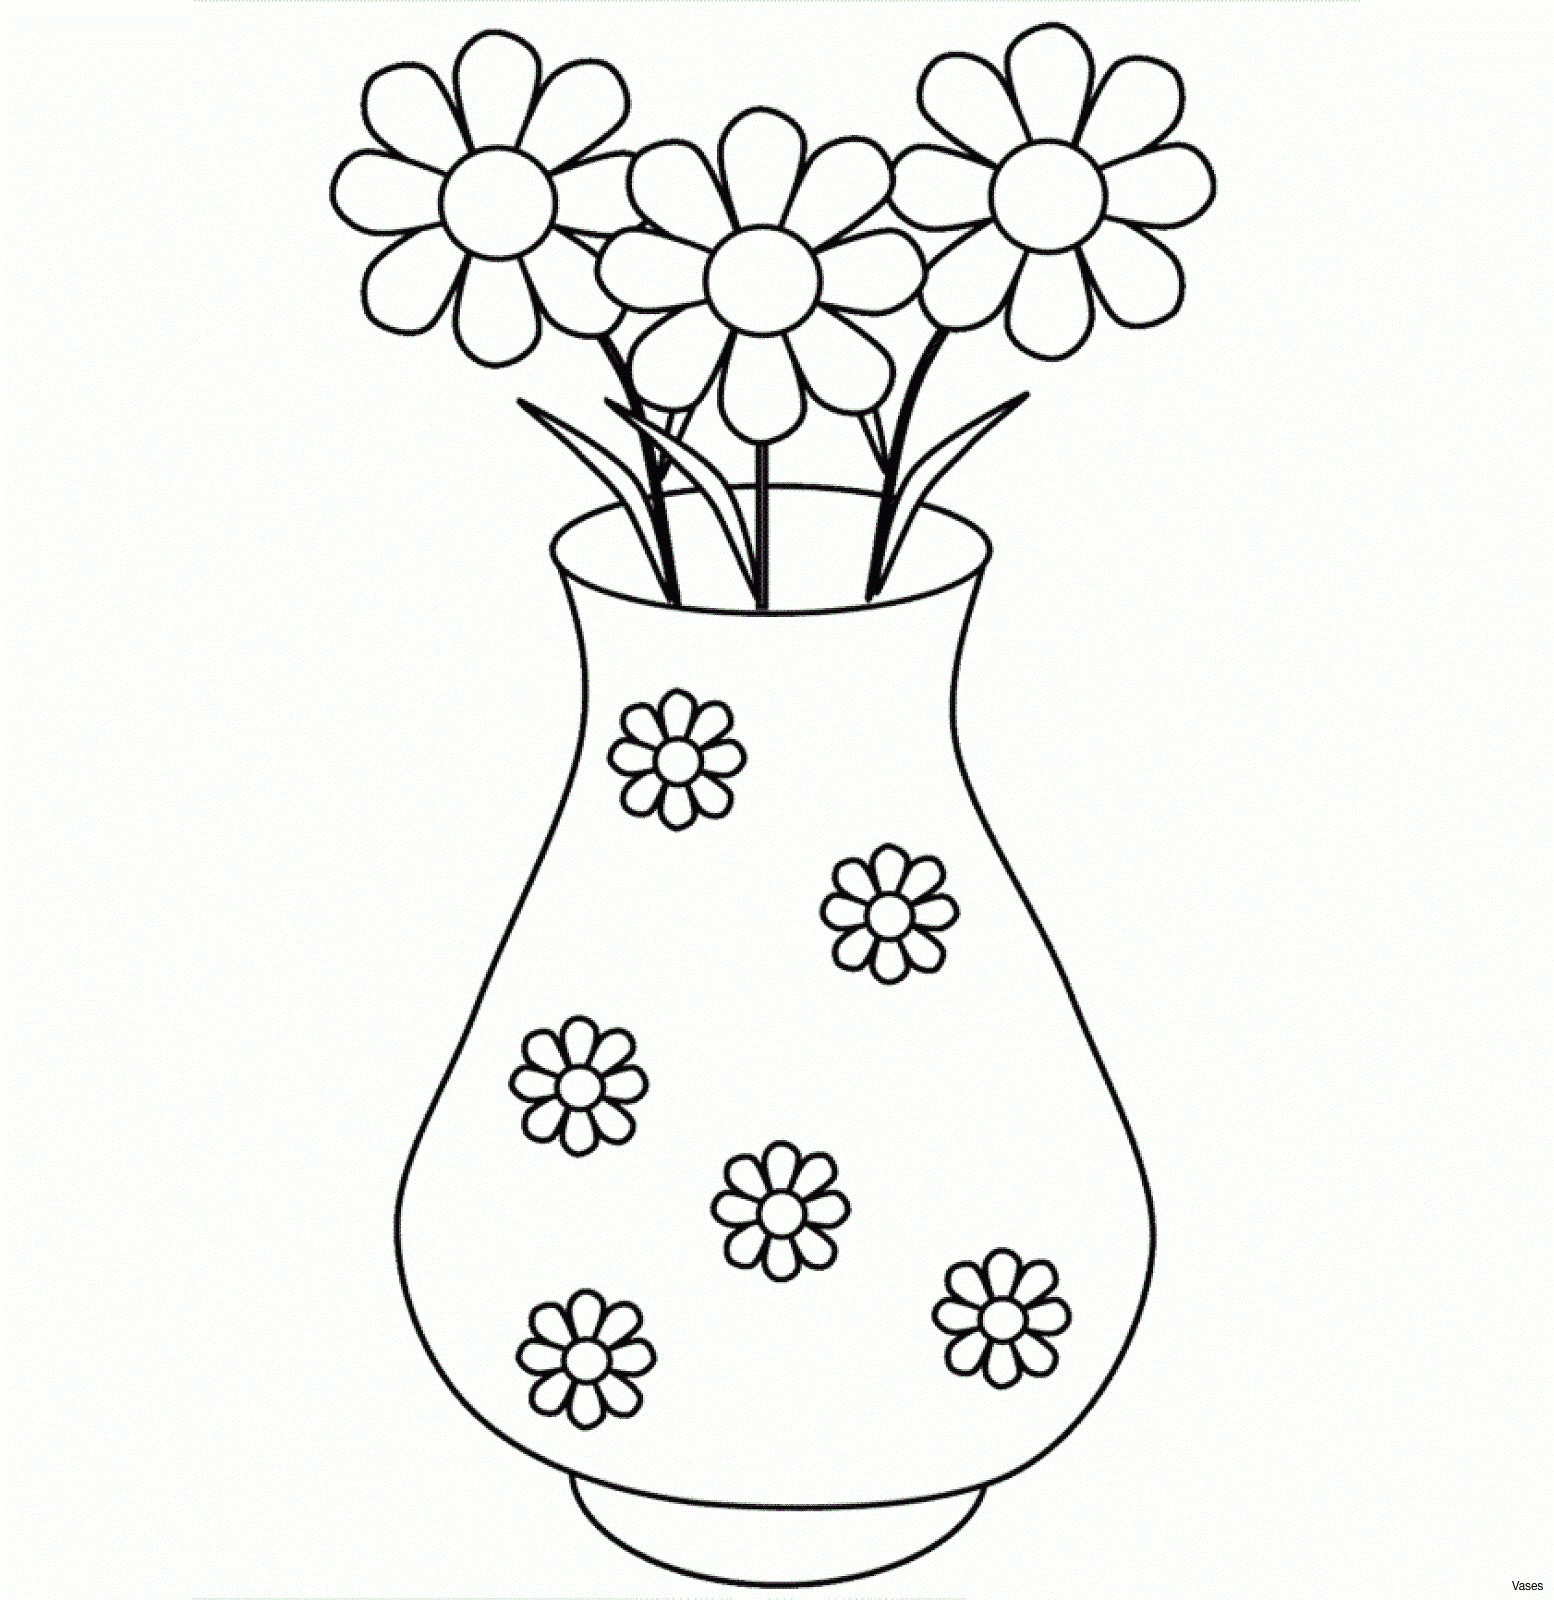 Drawing Of A Rose In A Vase Flowers to Draw Easy Step by Step Prslide Com